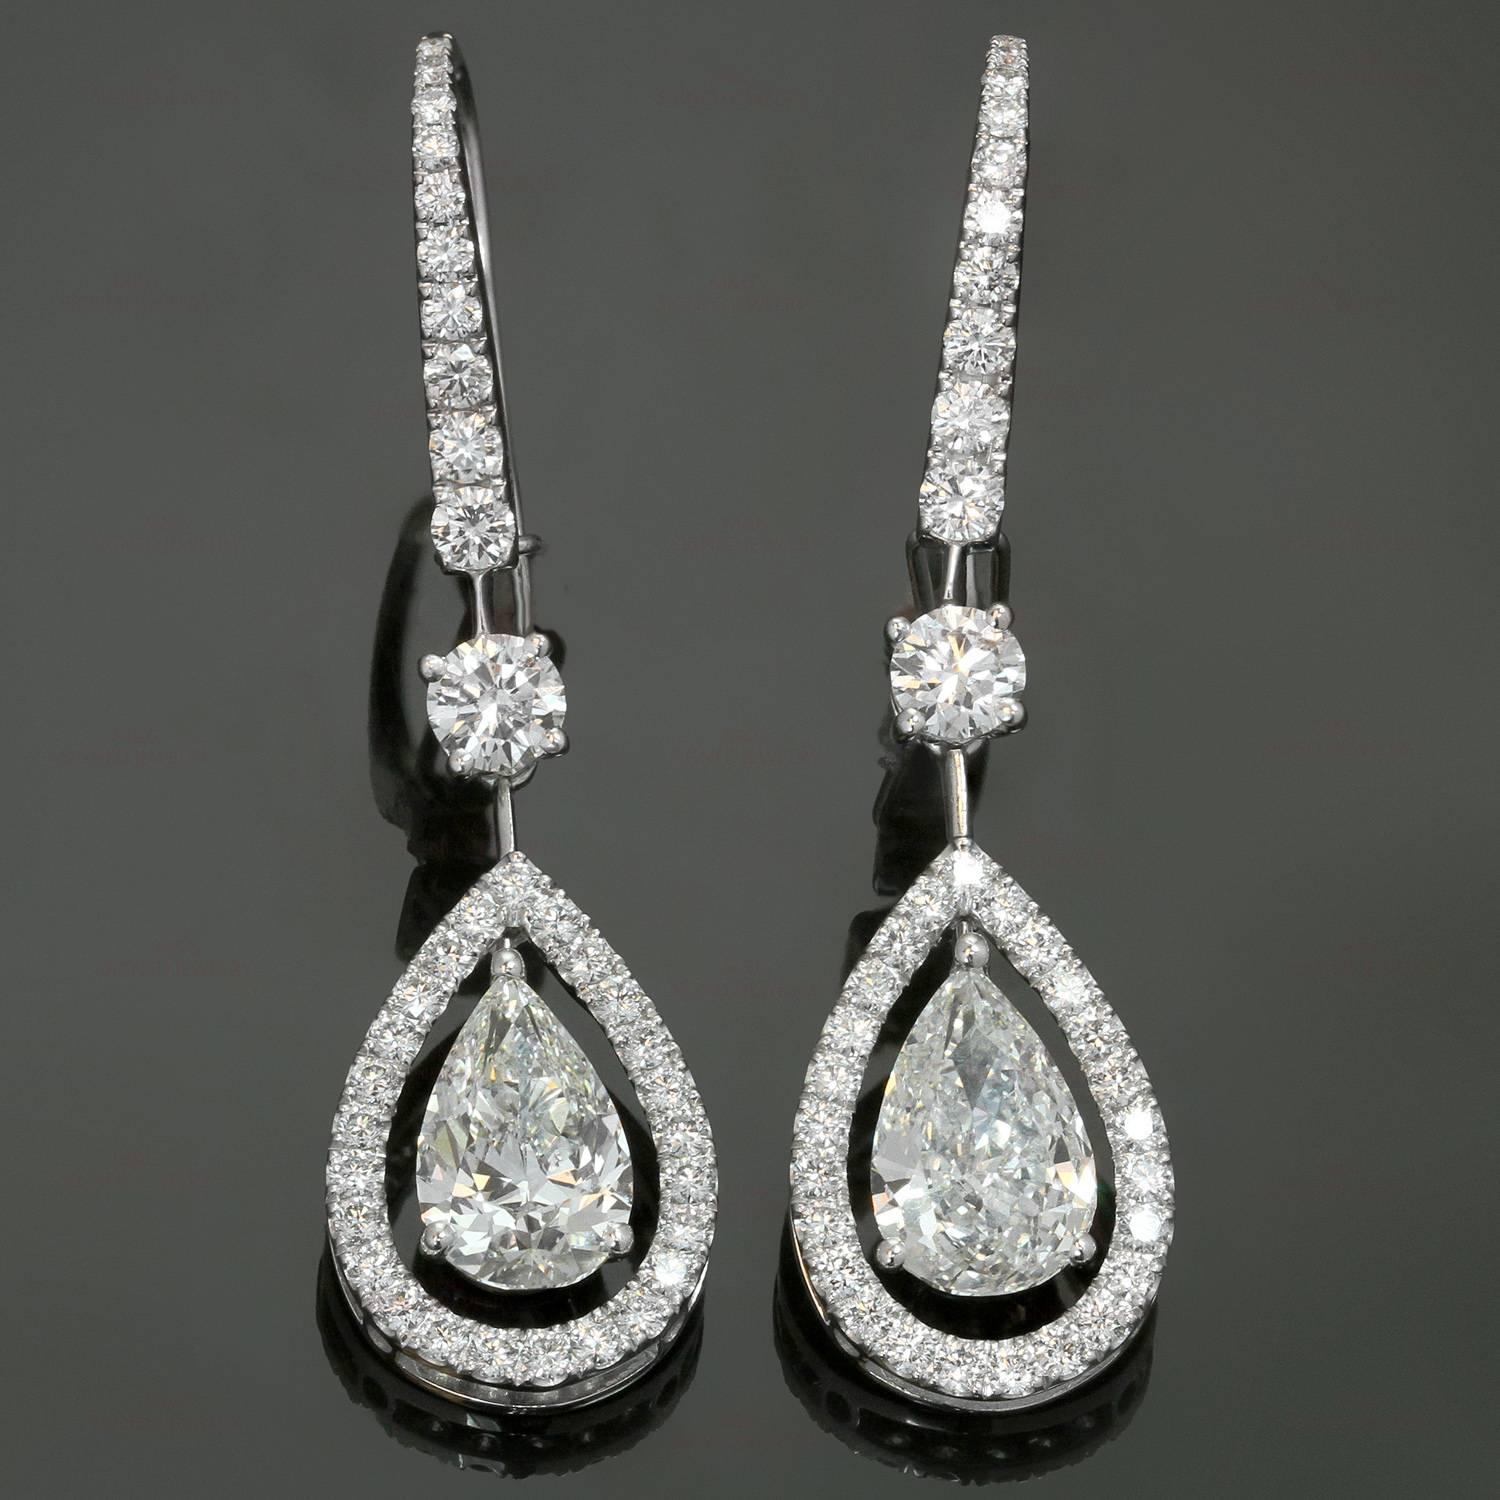 These exquisite drop earrings by Graff are crafted in 18k white gold and set with 2 GIA certified pear-shaped G VS2 diamonds weighing 3.02 carats, 2 round brilliant-cut diamonds of an estimated 0.40 carats and 60 smaller diamonds of an estimated